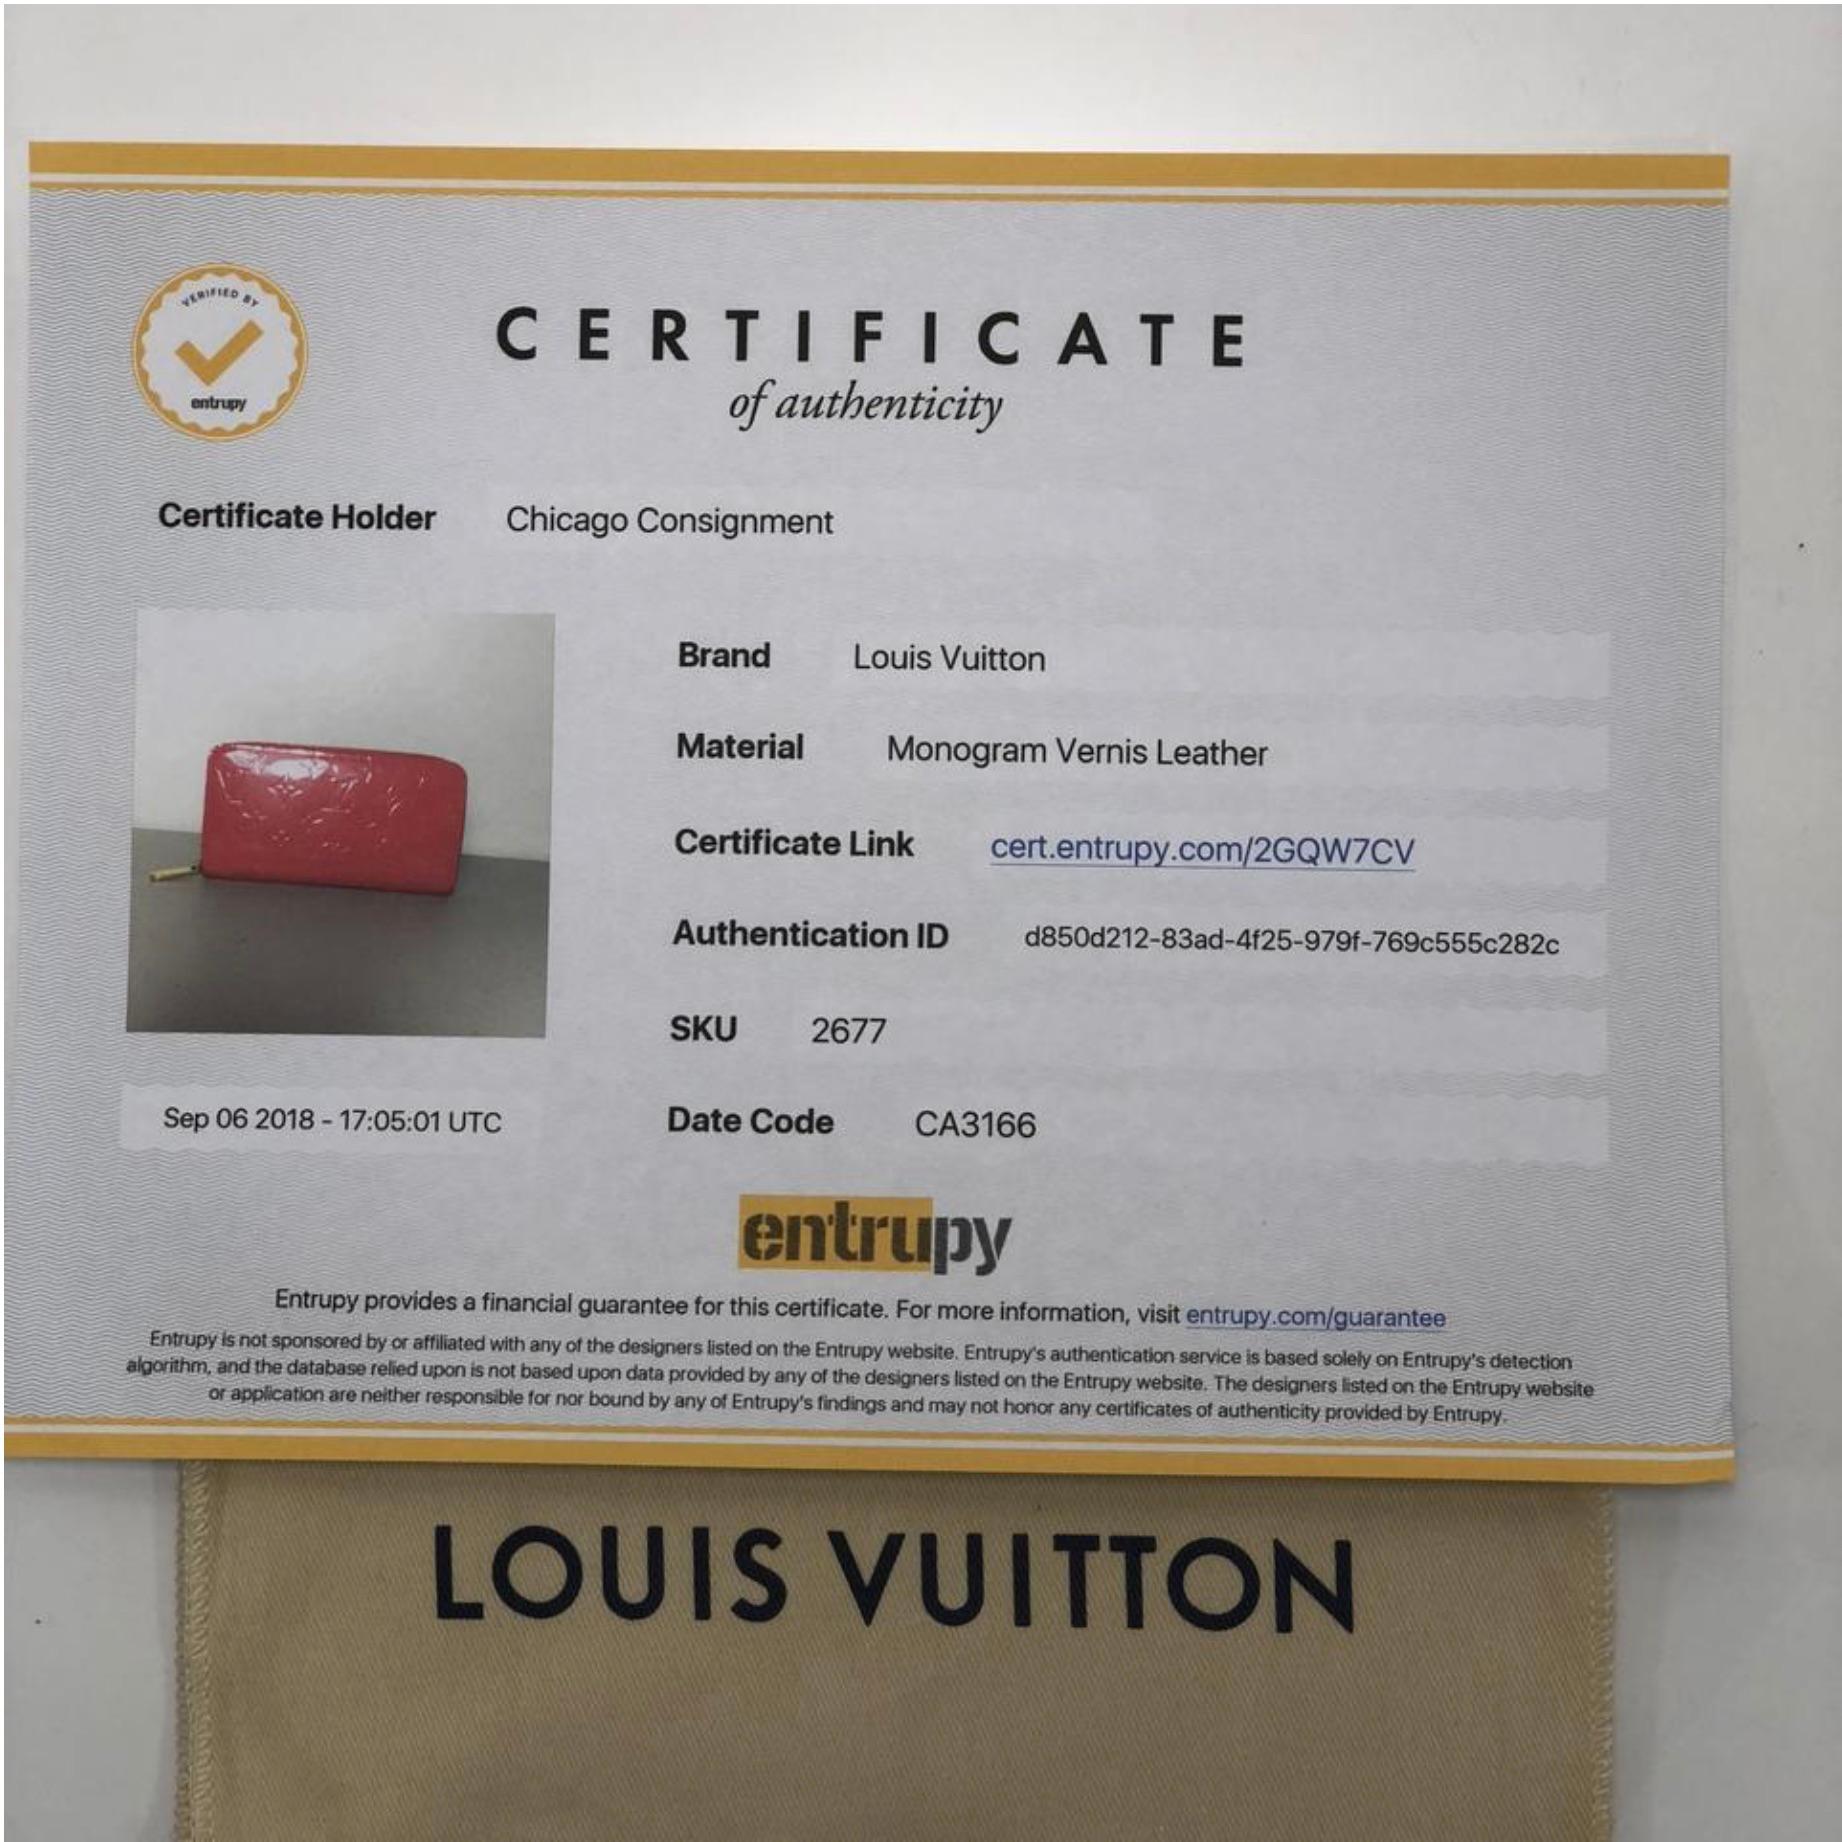 MODEL - Louis Vuitton Vernis Zippy Wallet in Pink

CONDITION - Exceptional! No visibile signs of wear.

SKU - 2677

DATE/SERIAL CODE - CA3166

ORIGIN - Spain

PRODUCTION - 2016

DIMENSIONS - L8 x H4.5 x D1

STRAP/HANDLE DROP - NA

MATERIAL - Vernis